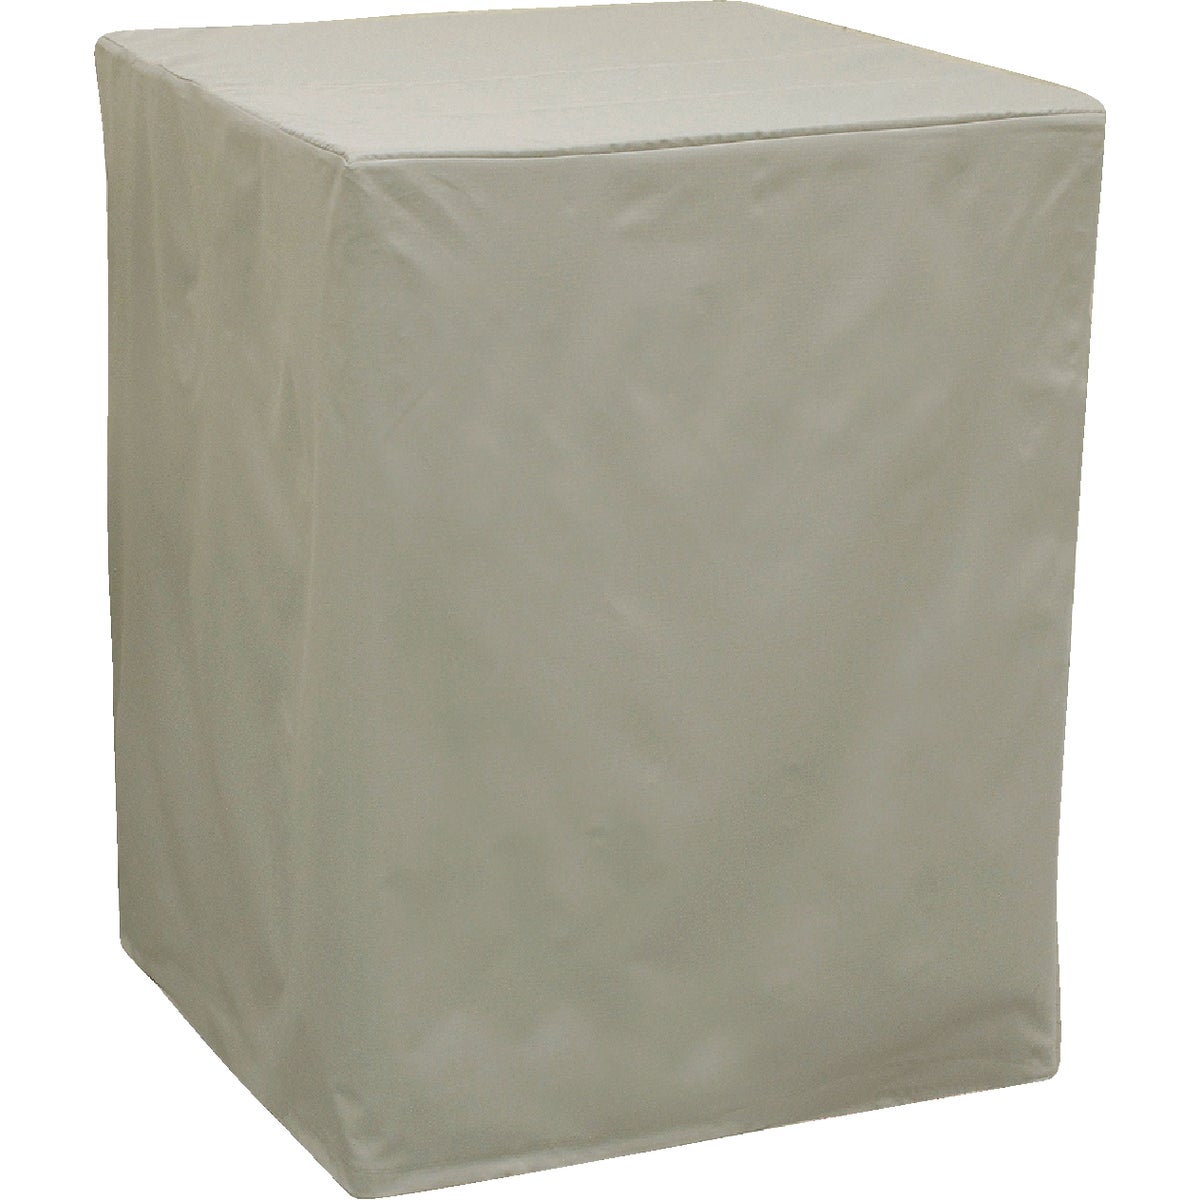 Dial 34 In. W x 34 In. D x 36 In. H Polyester Evaporative Cooler Cover, Side Discharge